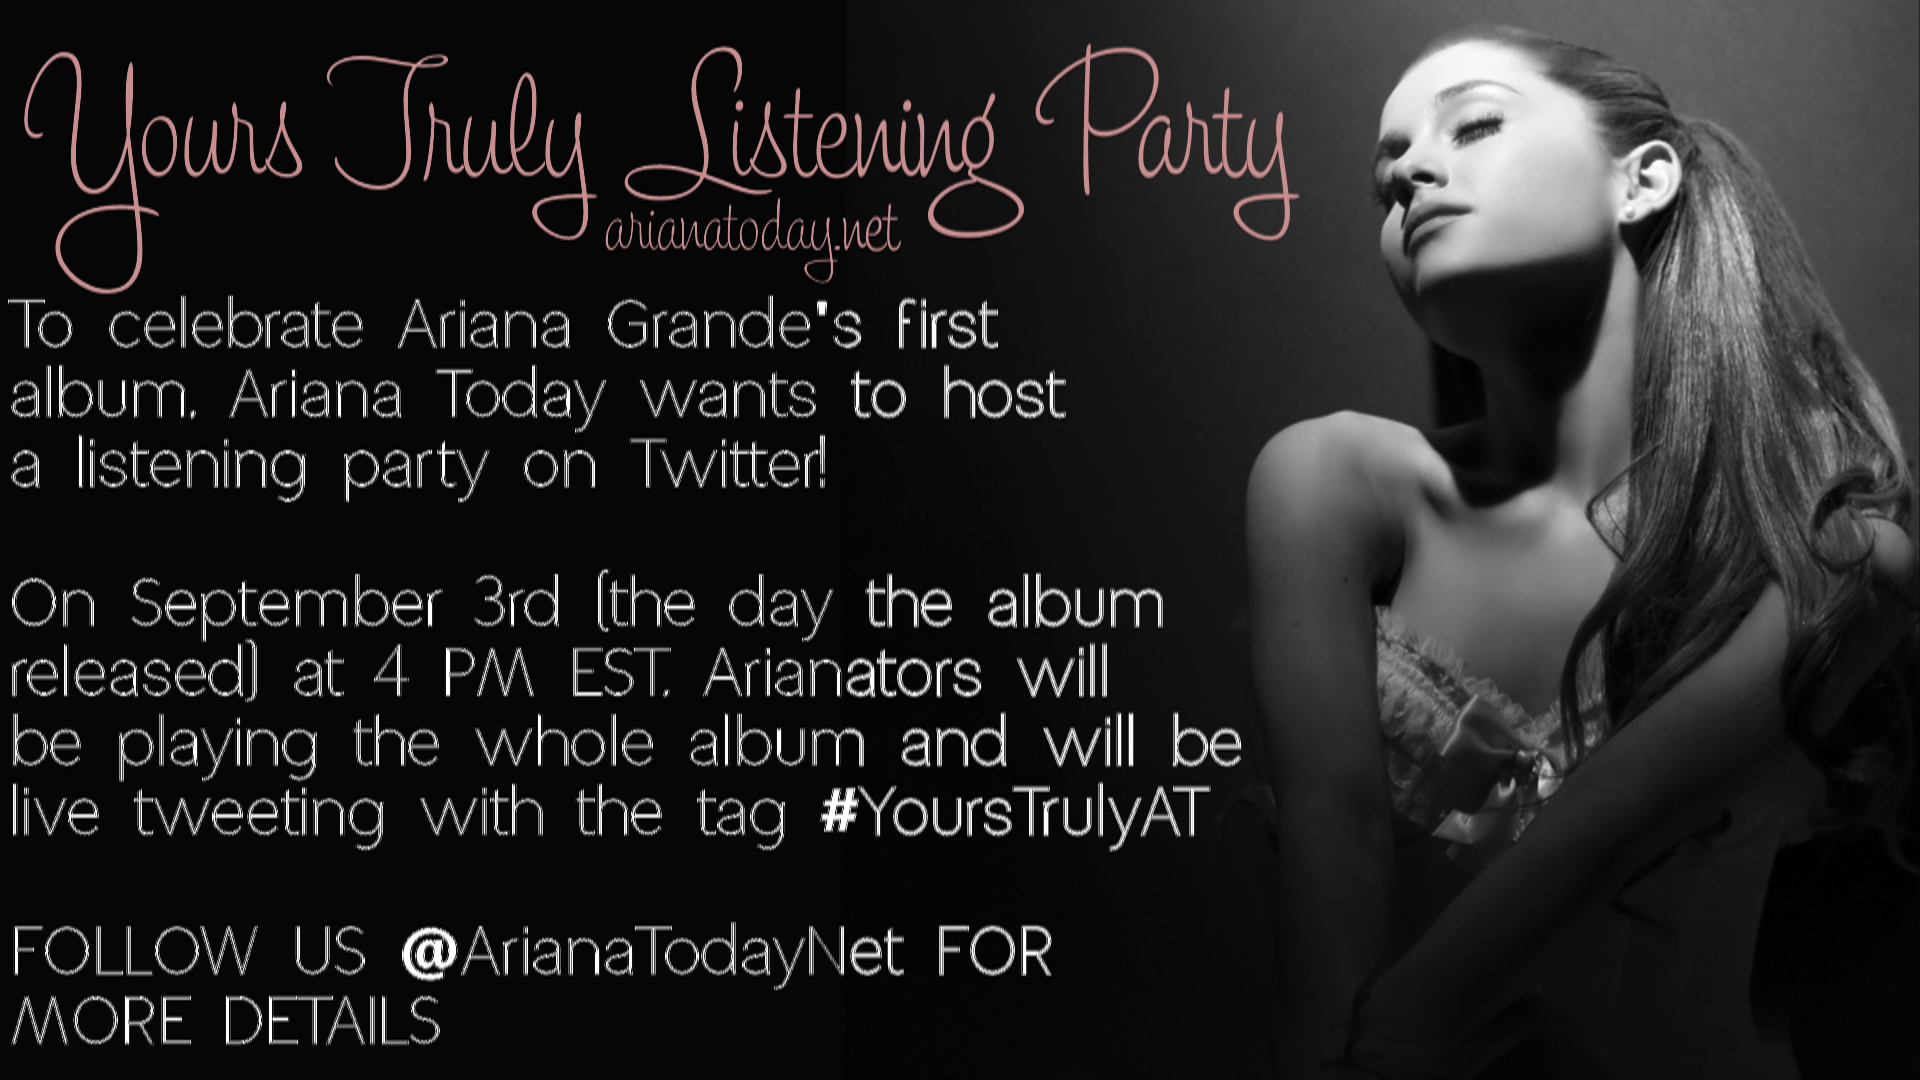 CLOSED) SEPTEMBER 3: Yours Truly listening party on Twitter. Ariana